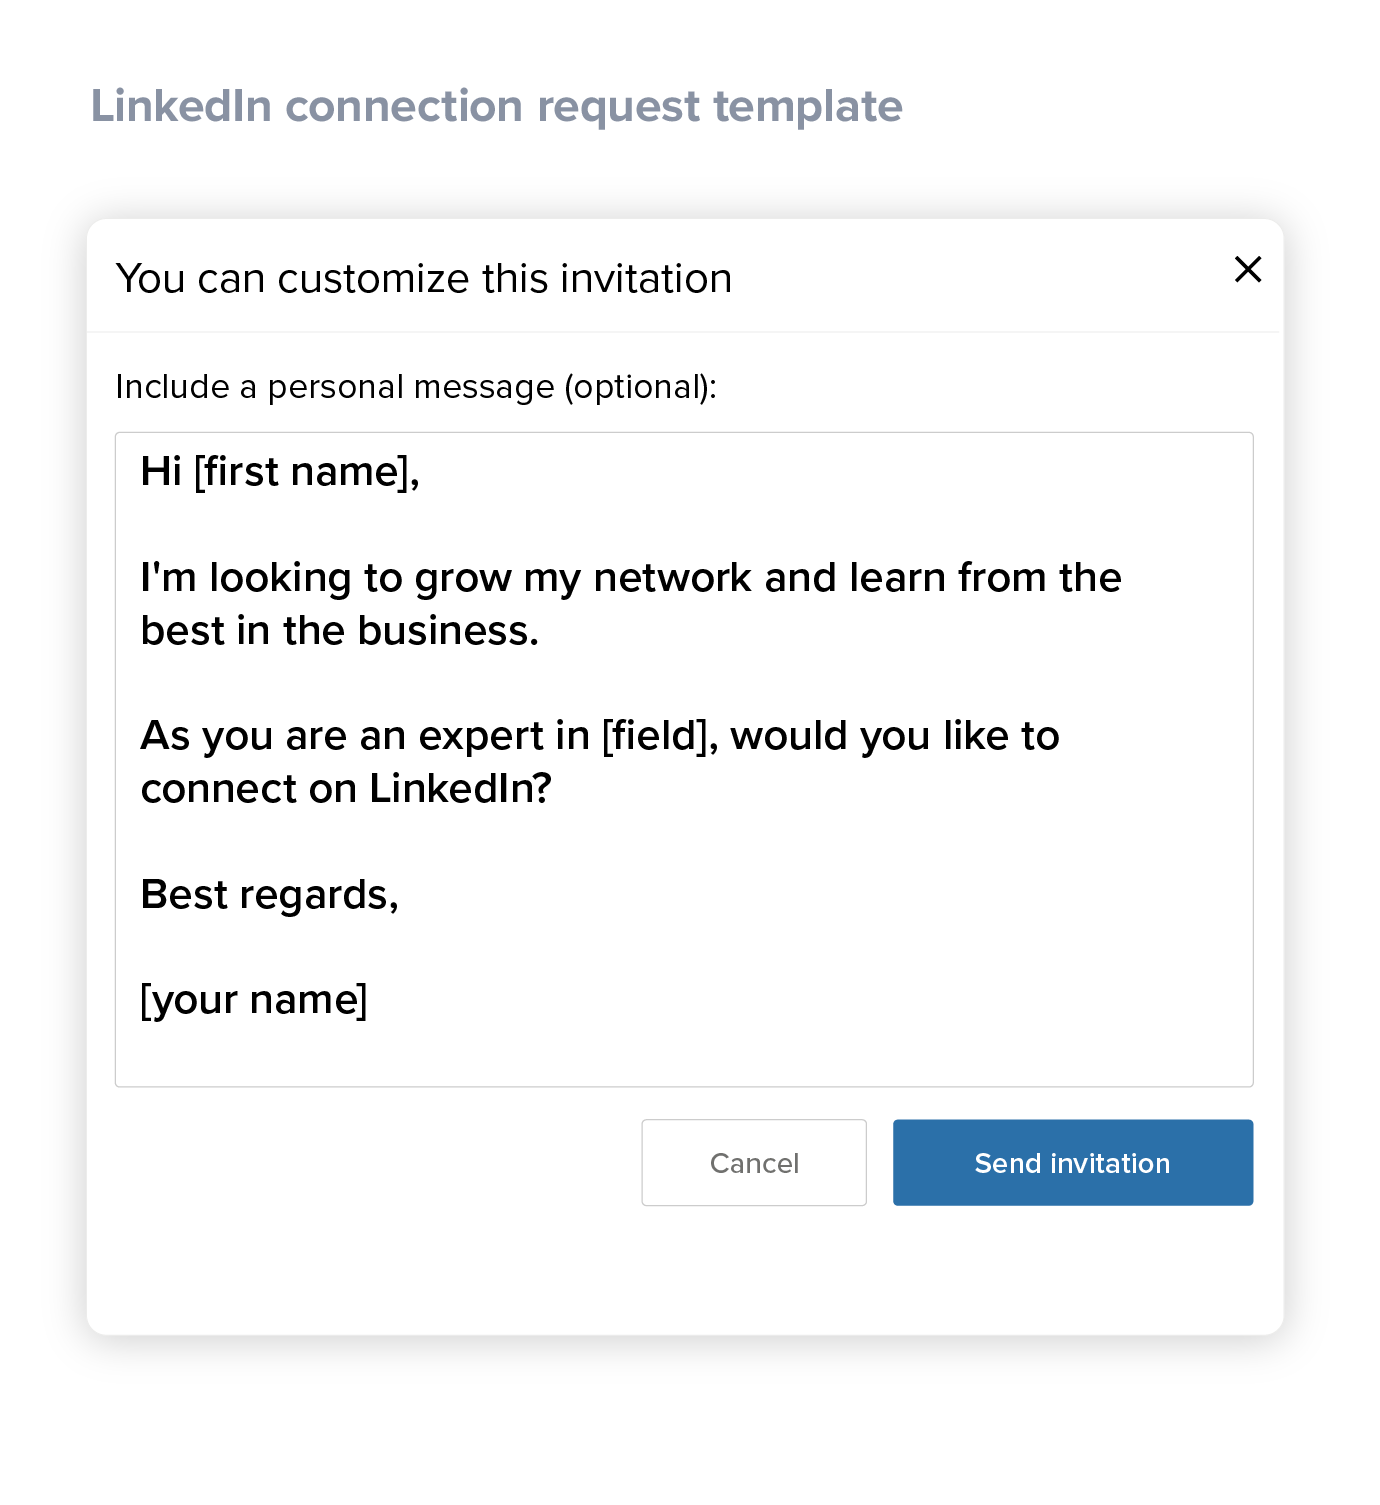 LinkedIn connection request template